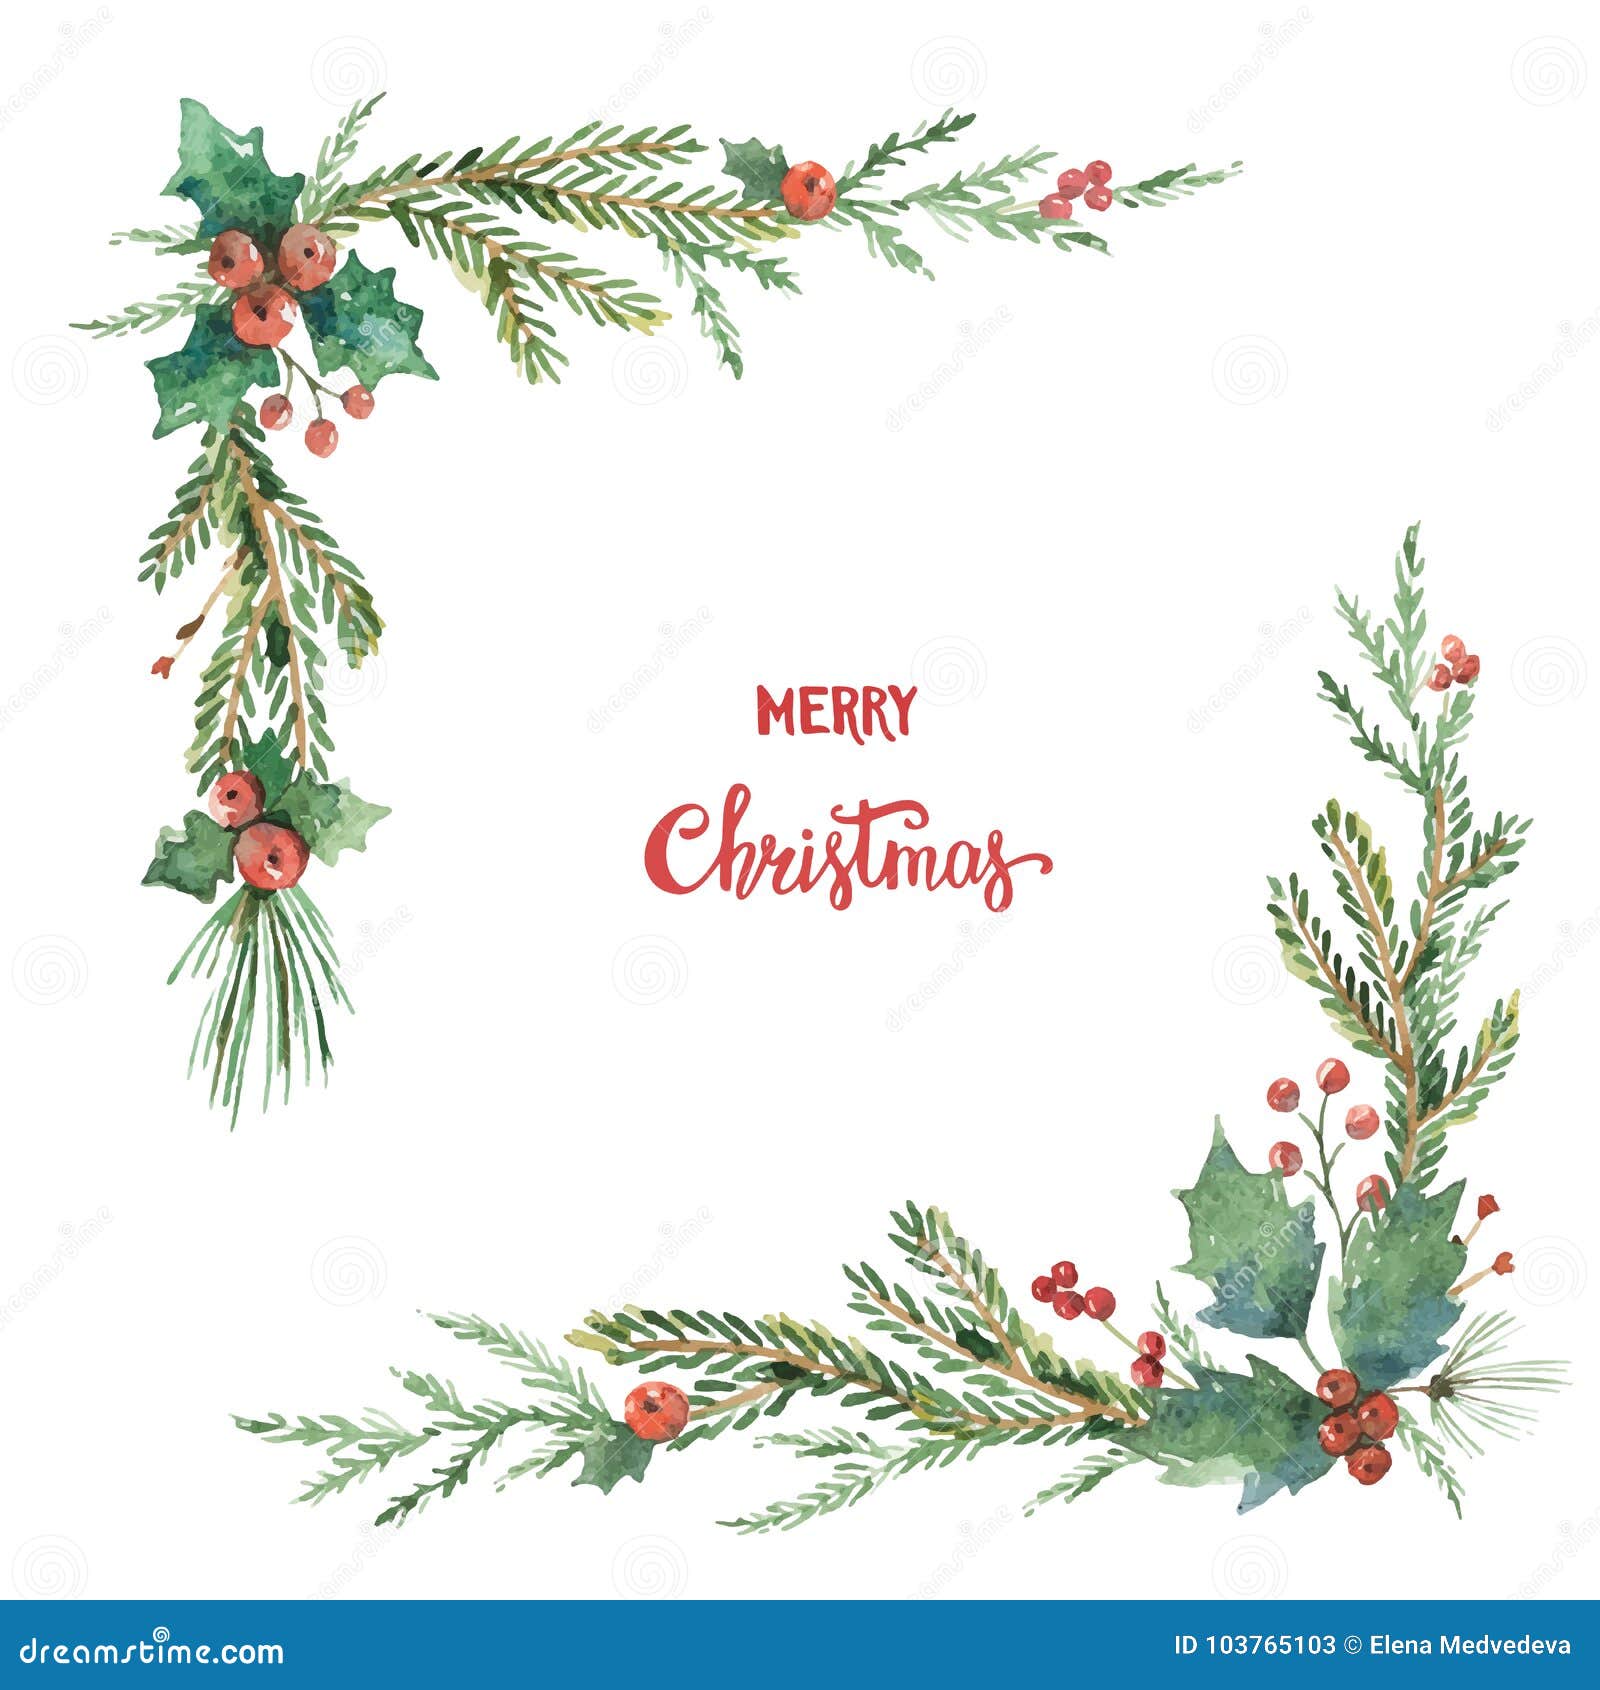 Long Garland Of Spruce Branches Holly And Red Berries Festive Wide Decor  Panorama Vectoreps 10 Stock Illustration - Download Image Now - iStock